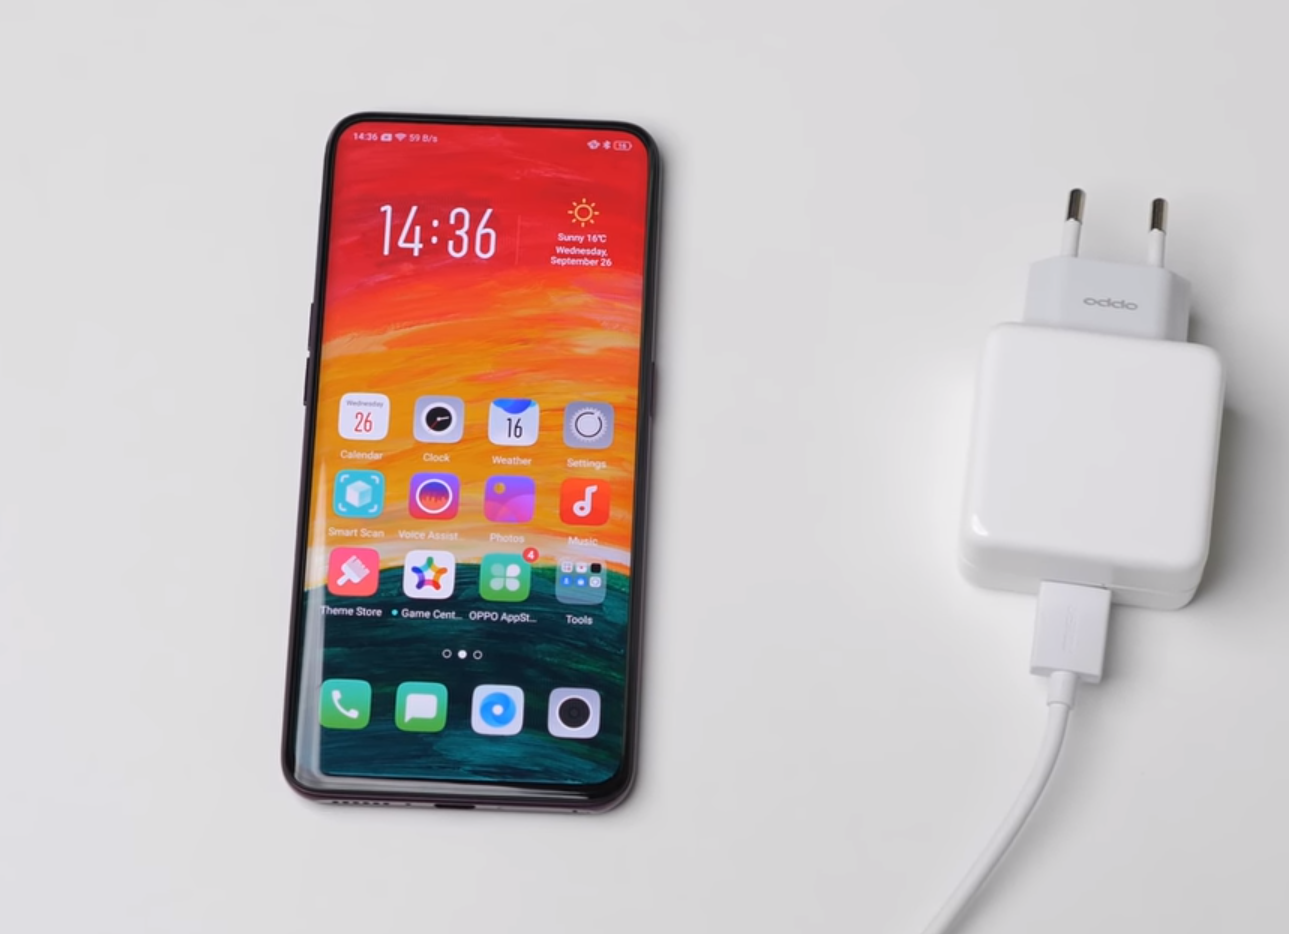 Oppo VOOC Flash Charging Technology Expands its Range By Licensing Third-Party Companies